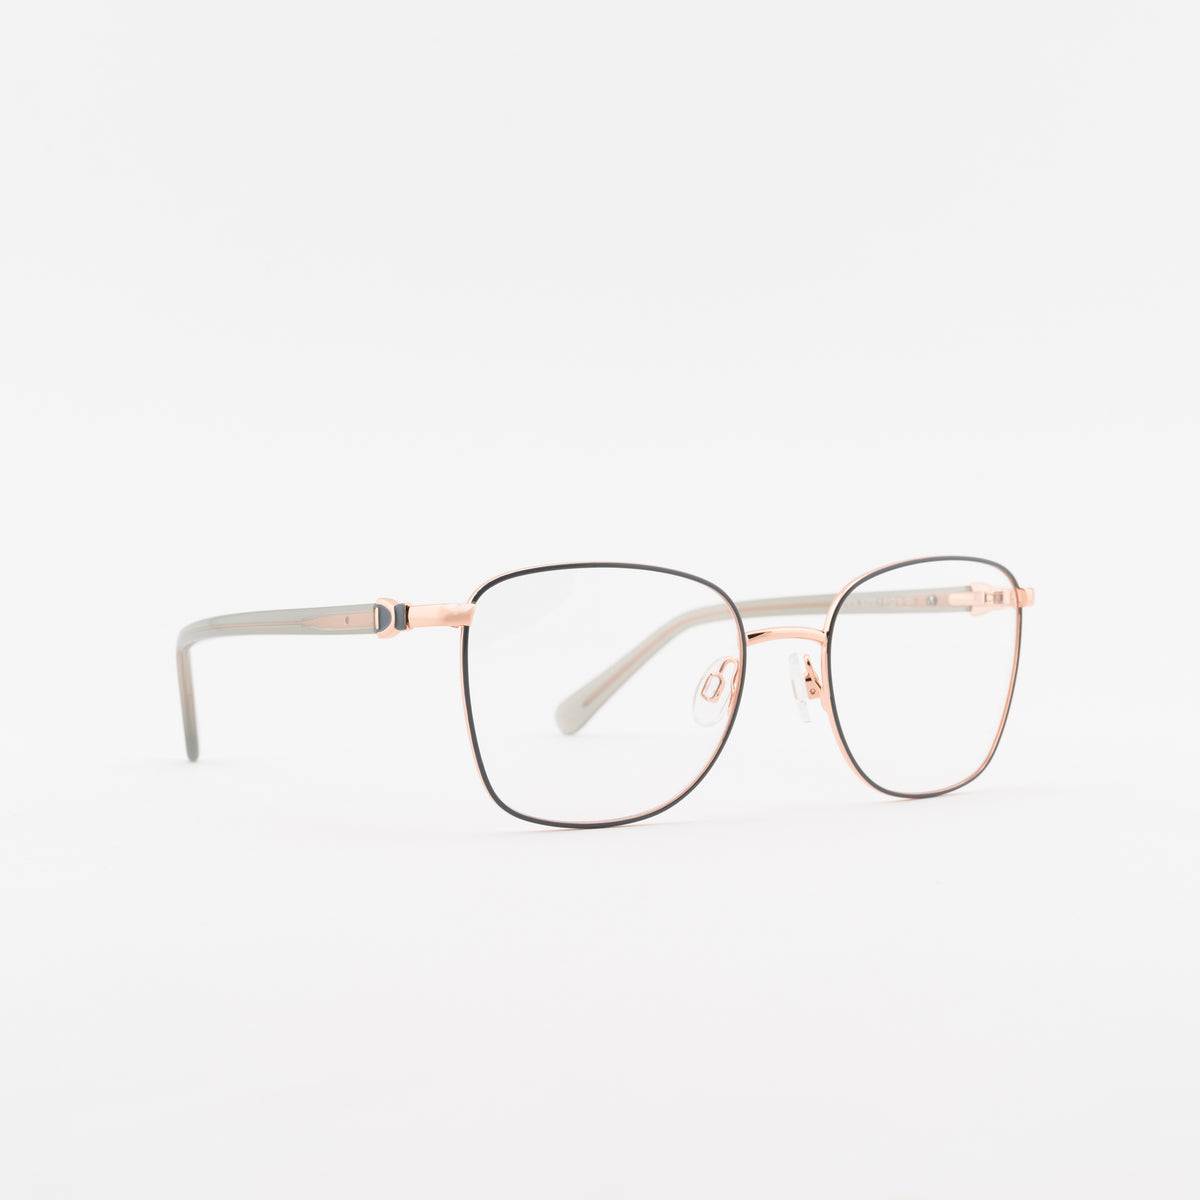 Superflex SF-574 Frames Superflex 51 S203 - GREY ROSE GOLD Not Available